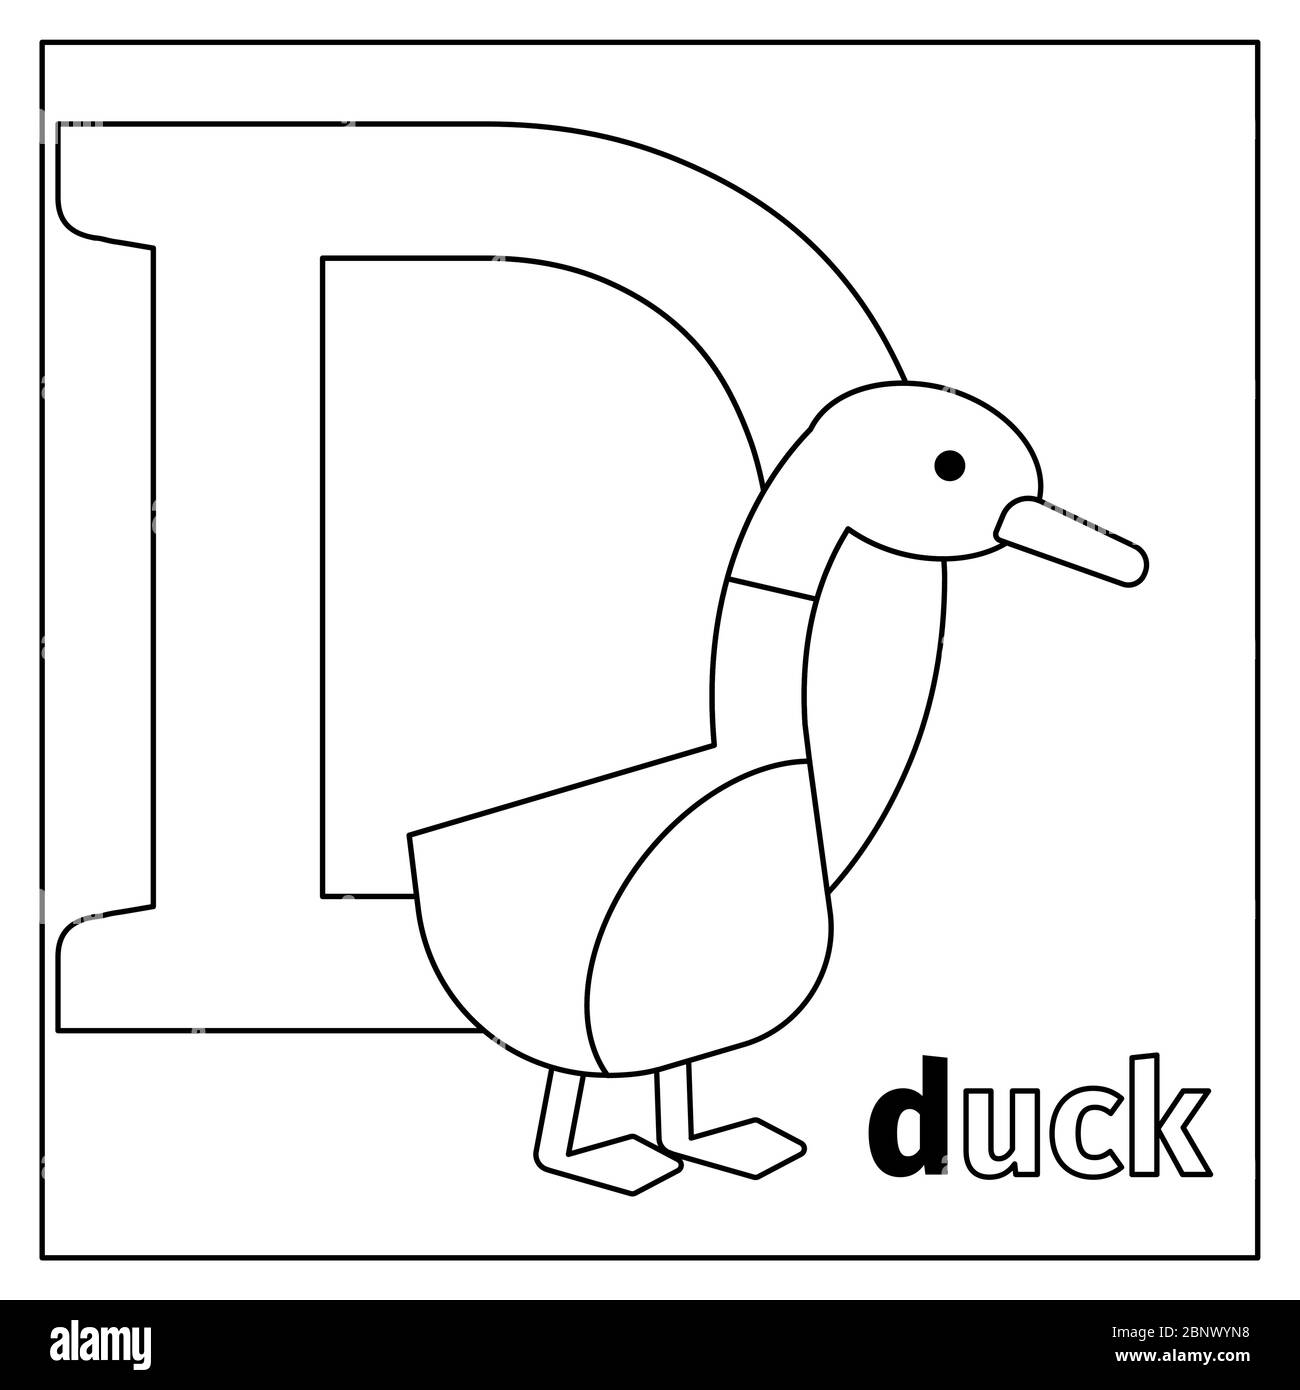 Coloring page or card for kids with english animals zoo alphabet duck letter d vector illustration stock vector image art